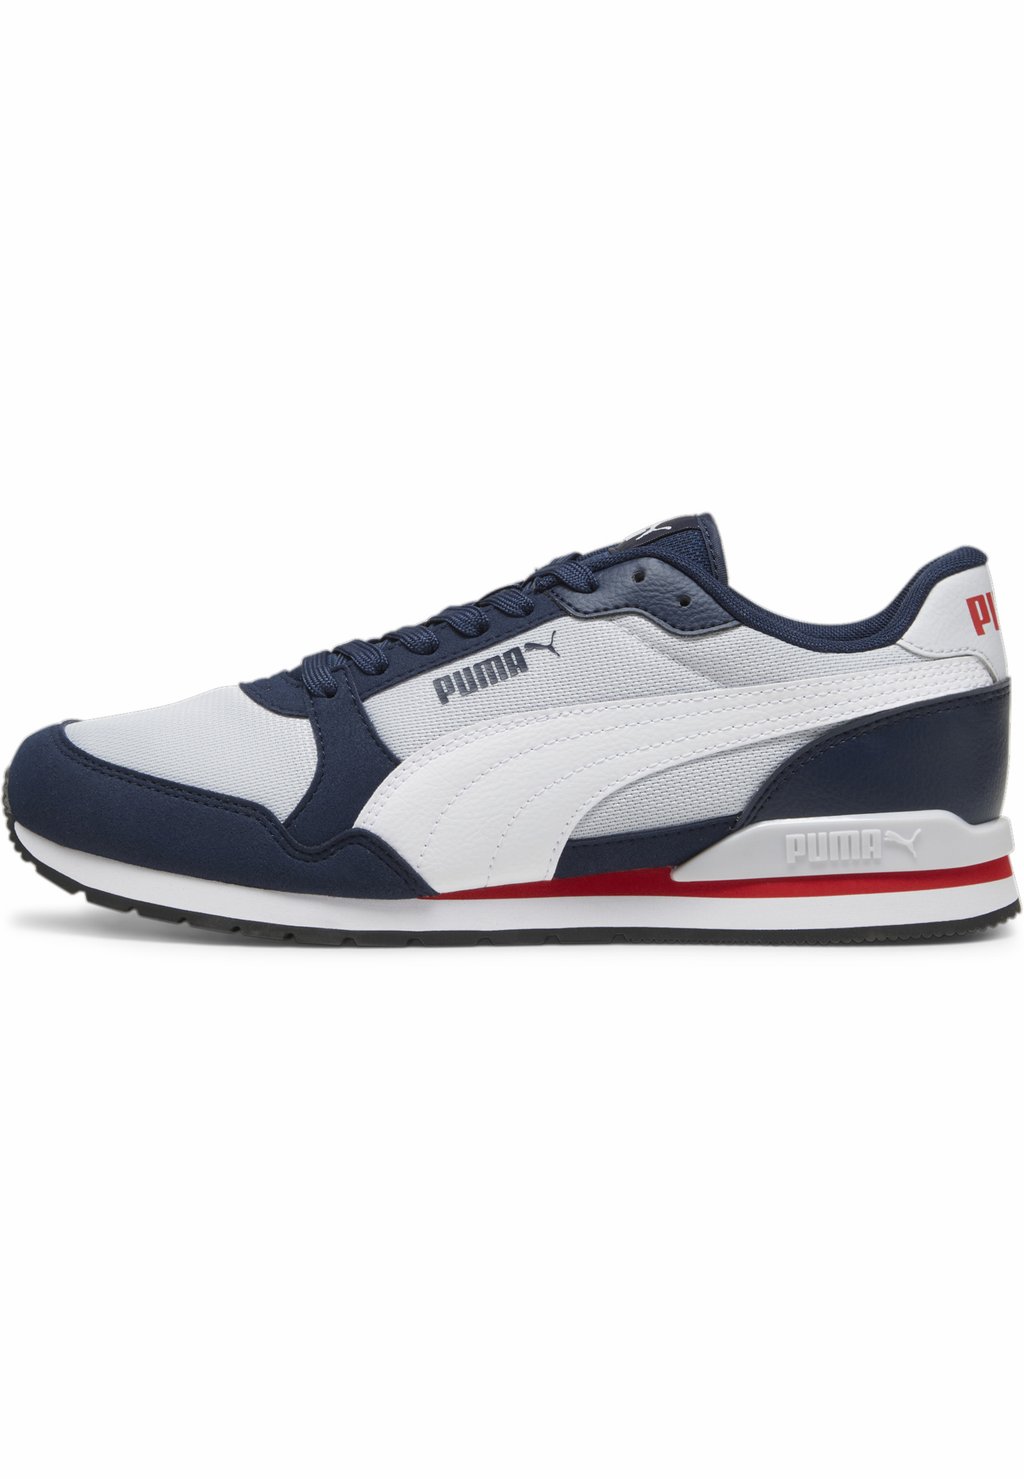 middleton ant red mist Низкие кроссовки Runner Puma, цвет silver mist white club navy for all time red black